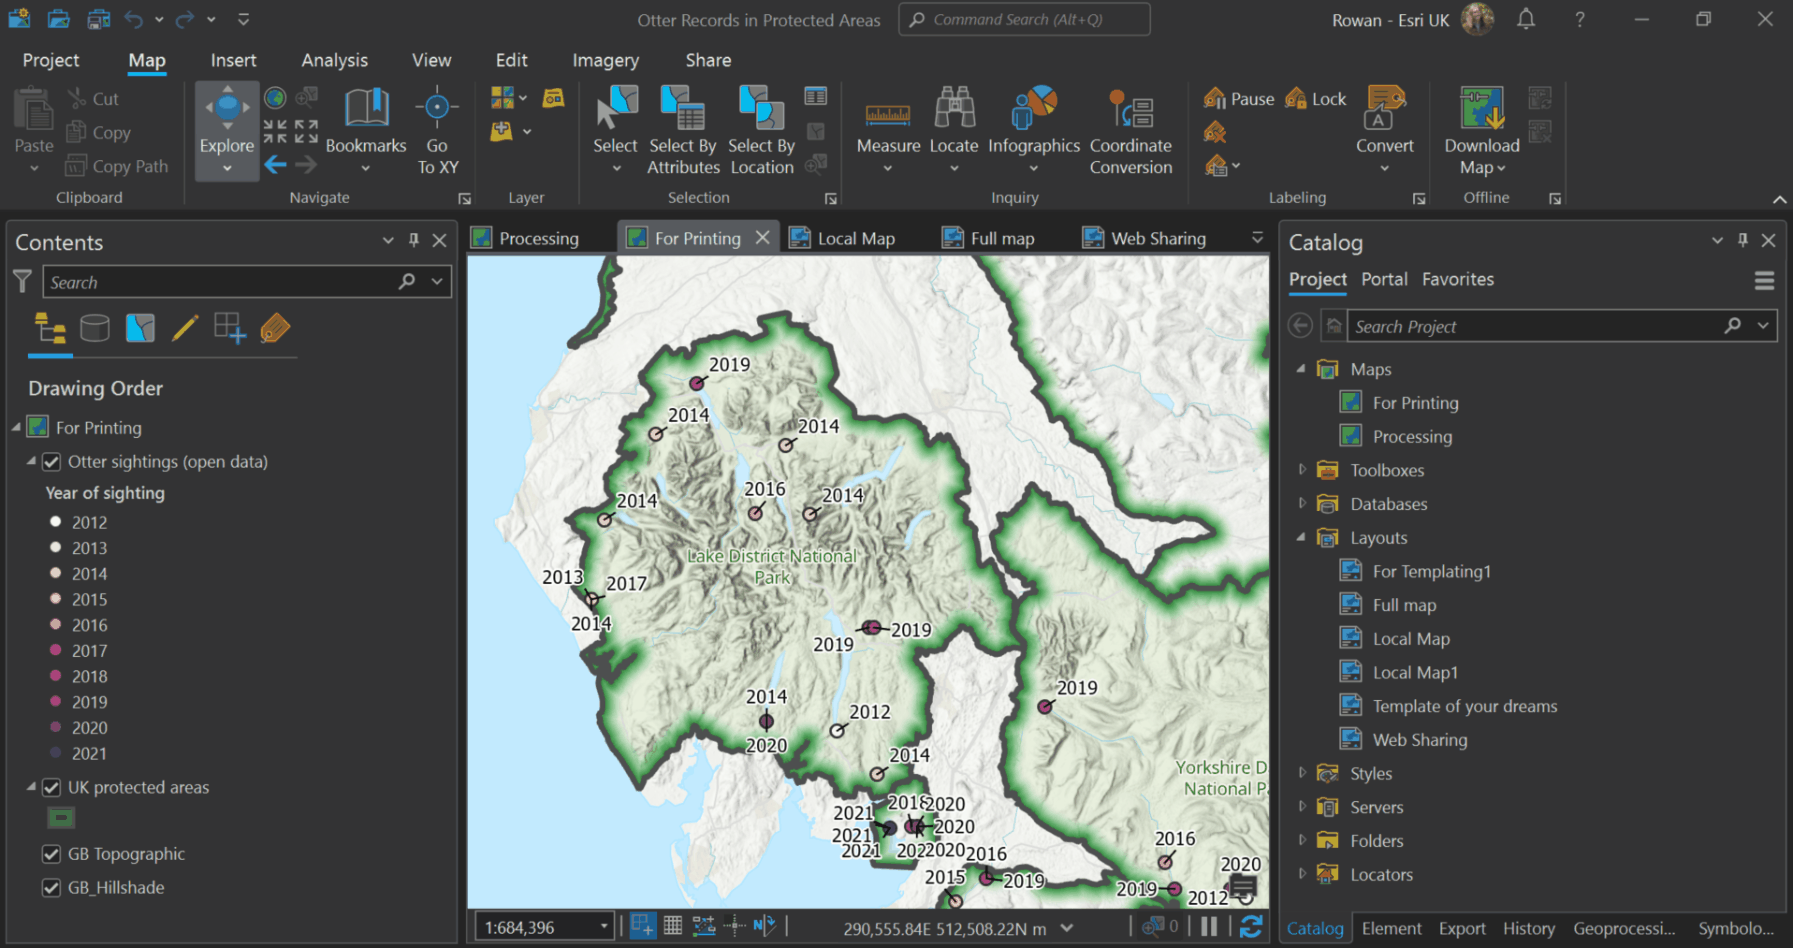 Gif of making a new layout from a map in ArcGIS Pro